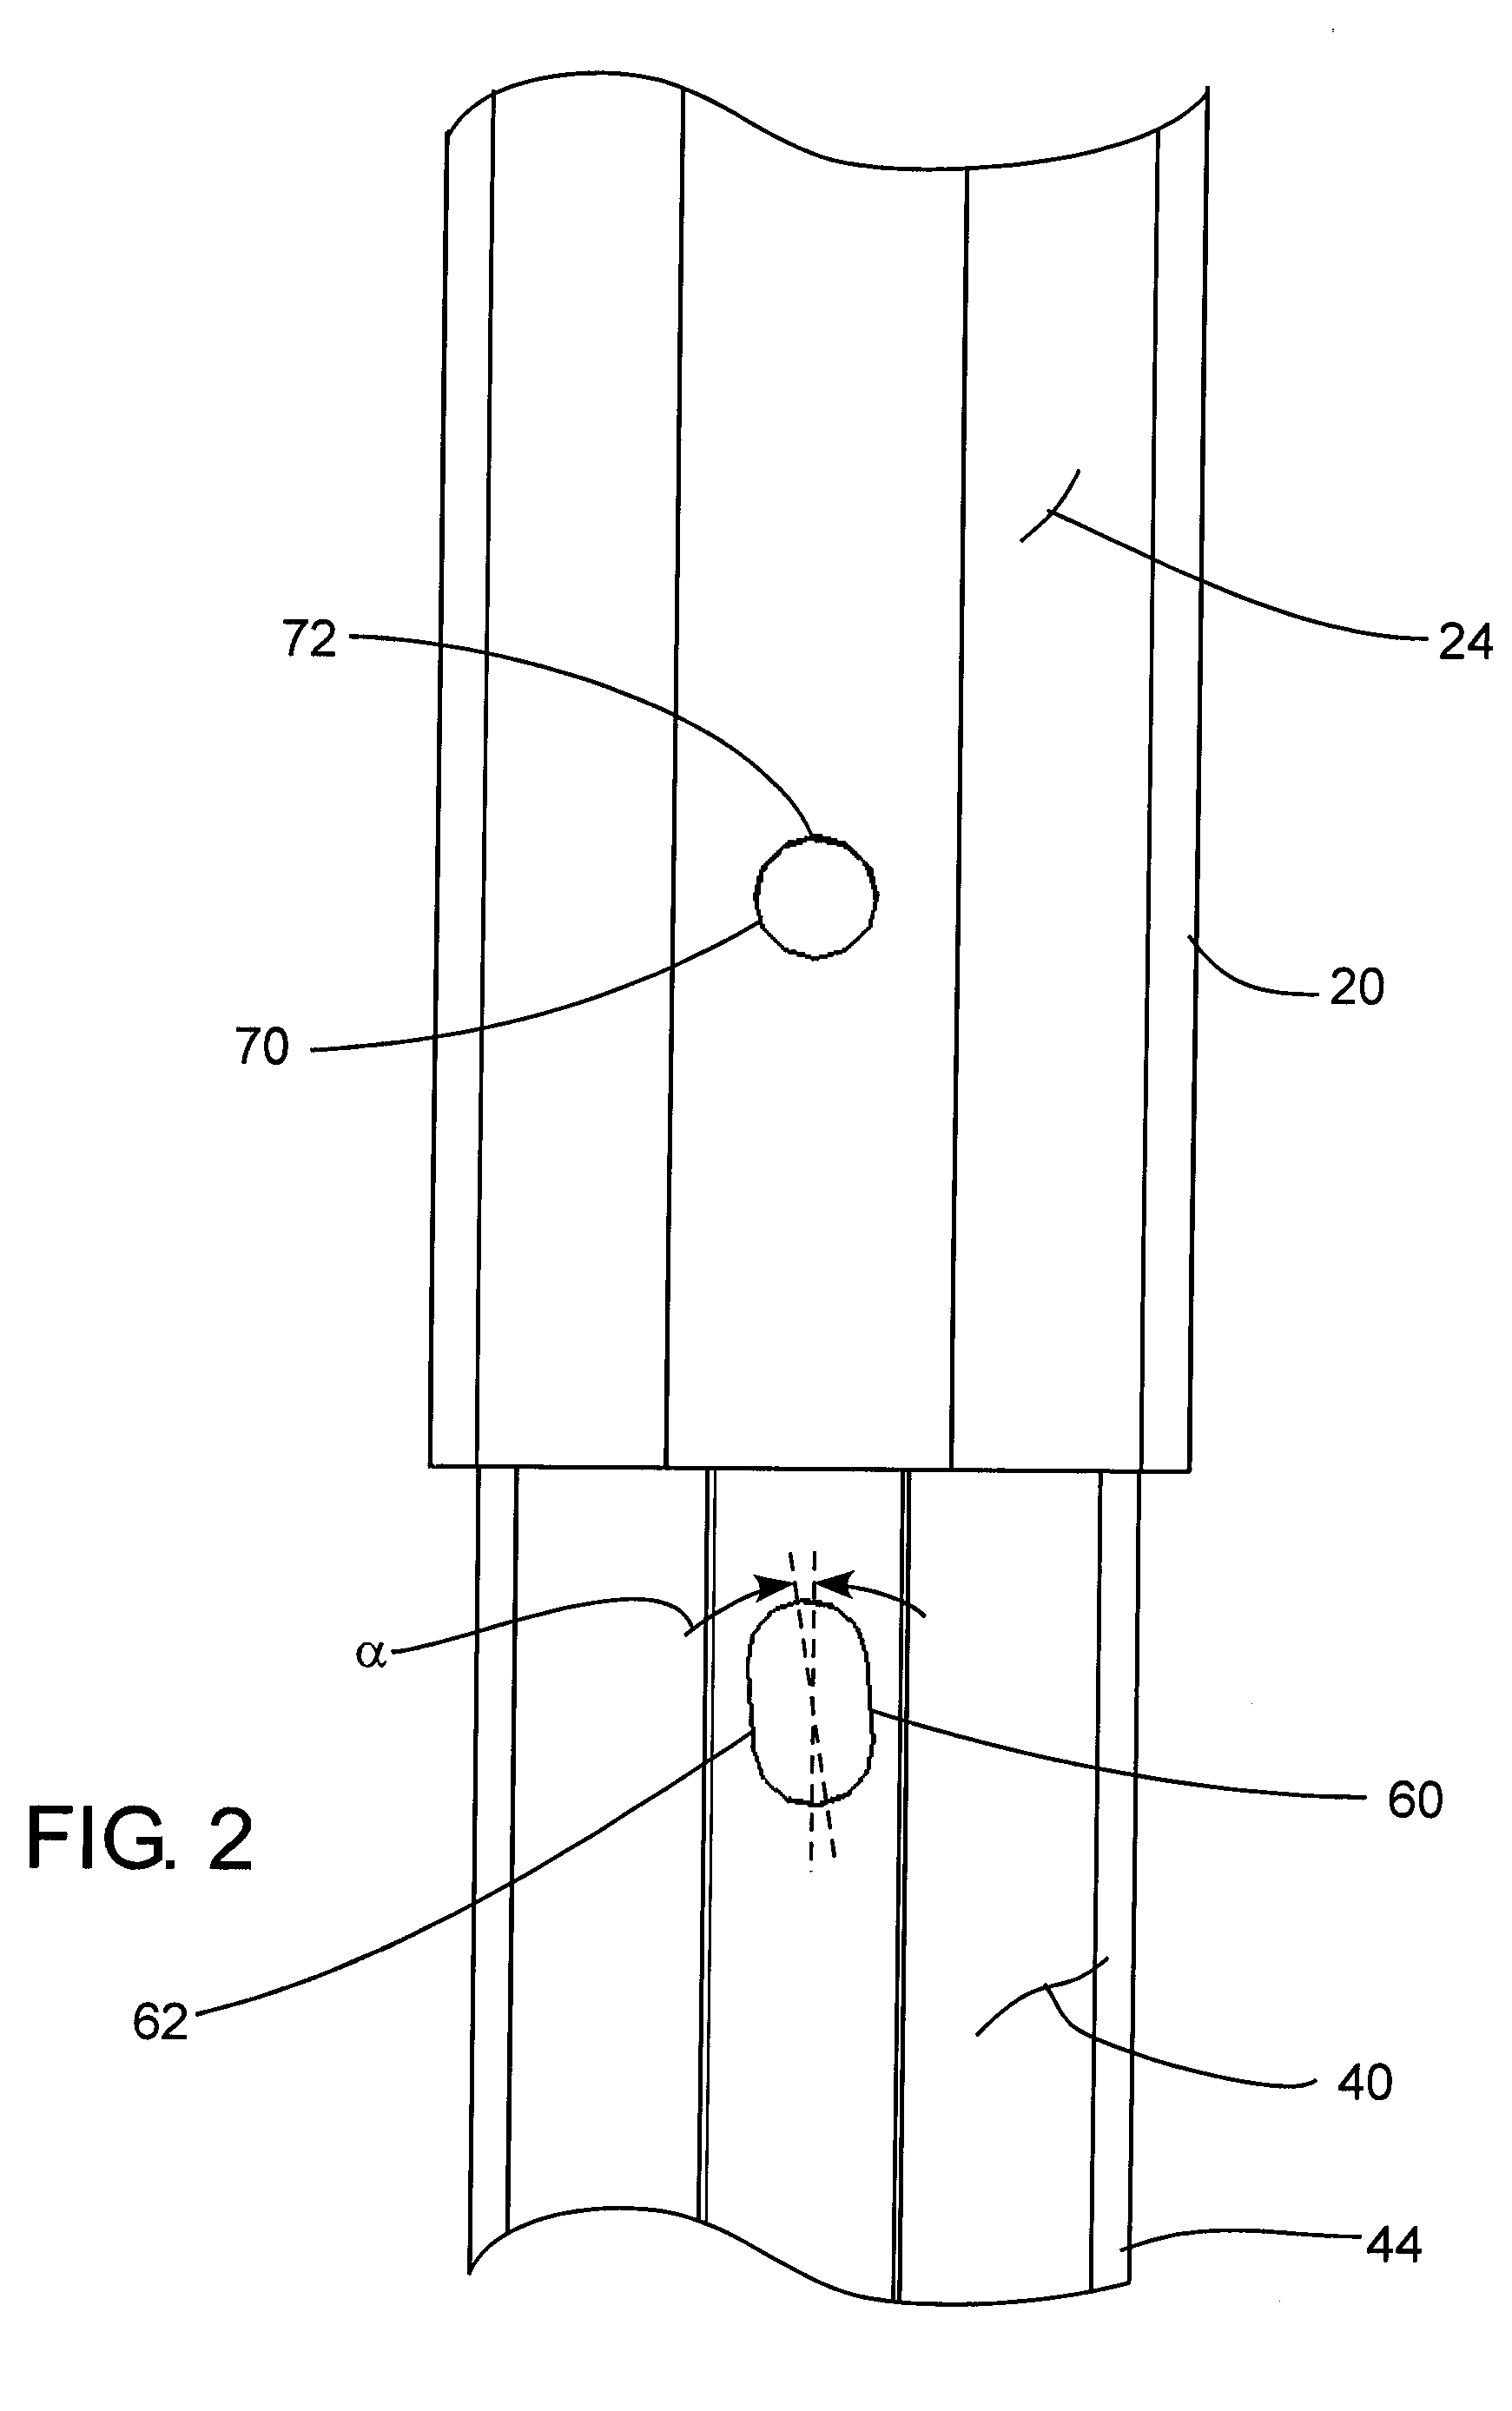 Telescoping Leg Lock and Portable Elevated Platform with Same